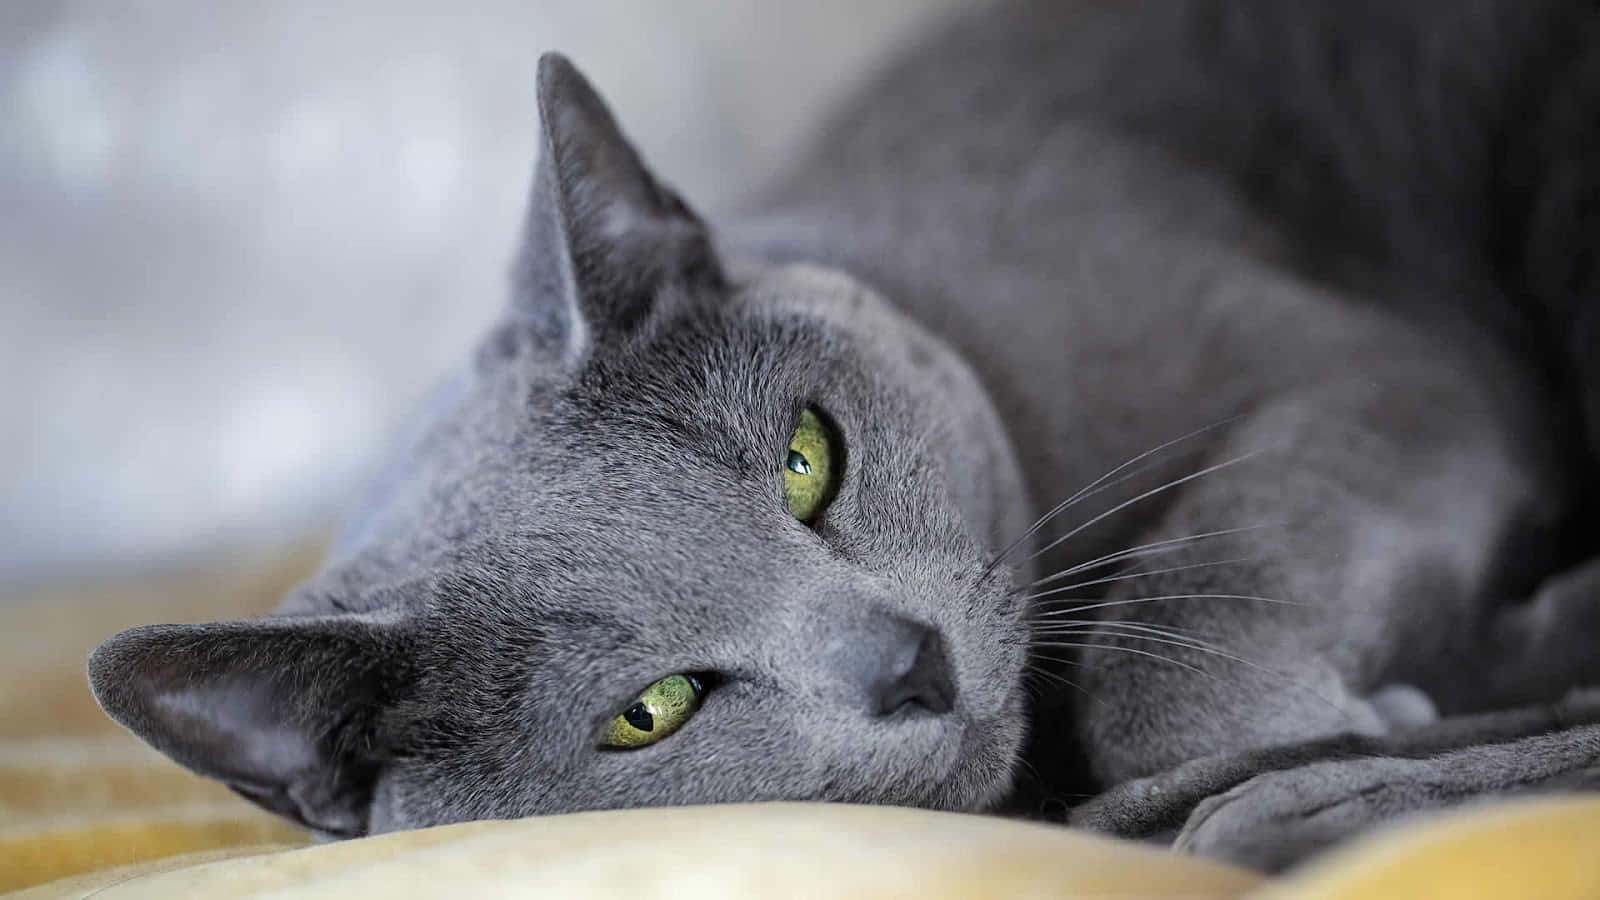 A Russian Blue Cat shown in Soft Natural Settings